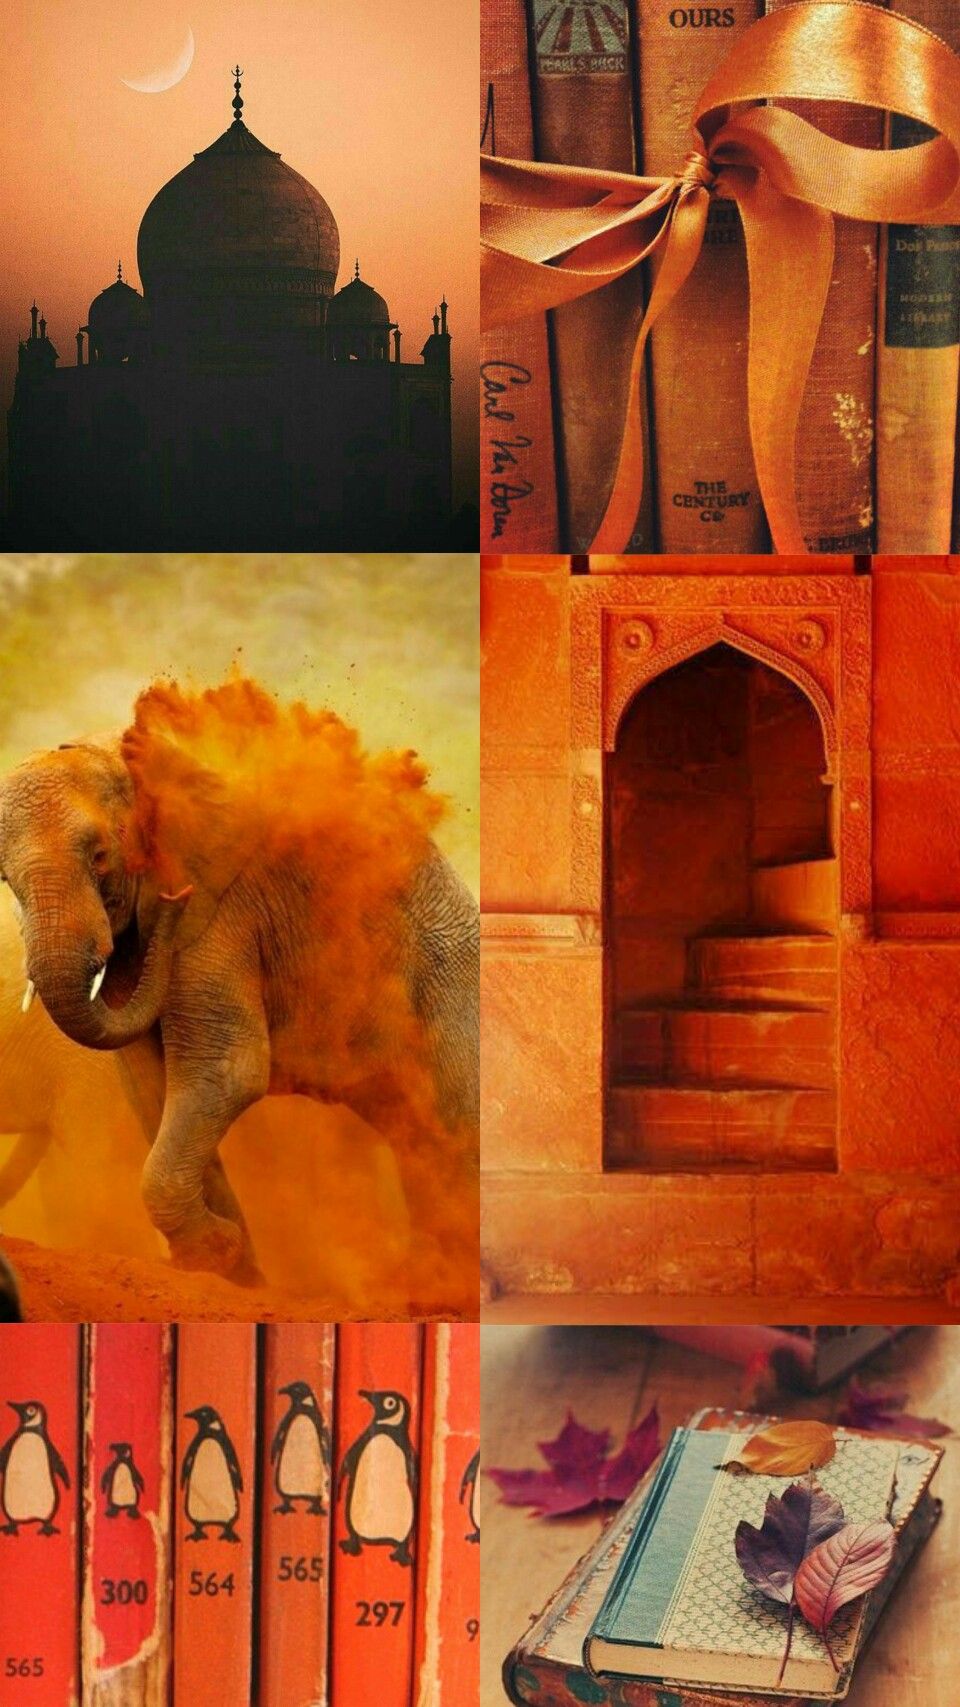 Books and India aesthetic. Aesthetic art, Indian aesthetic, Wallpaper